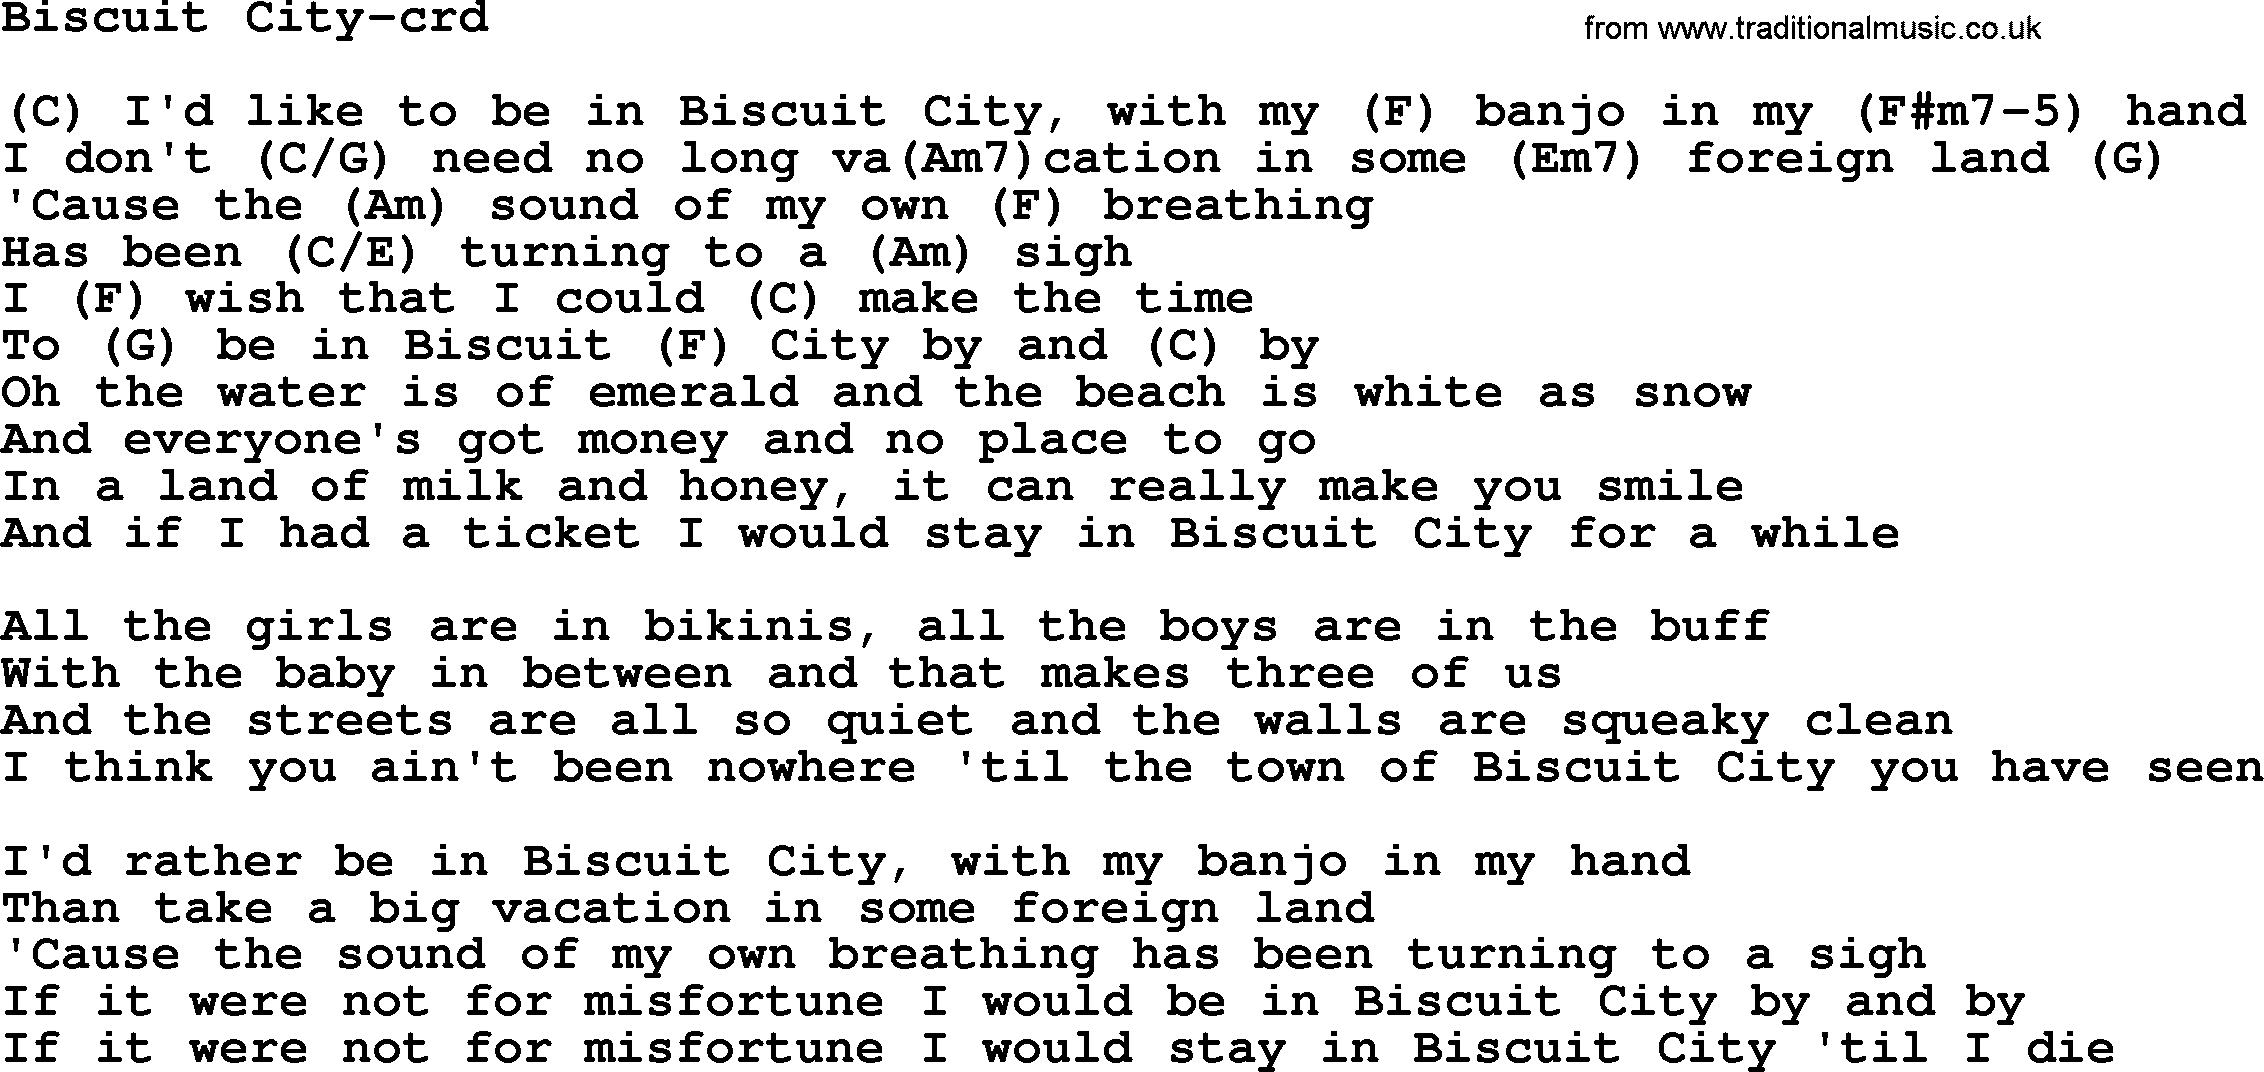 Gordon Lightfoot song Biscuit City, lyrics and chords